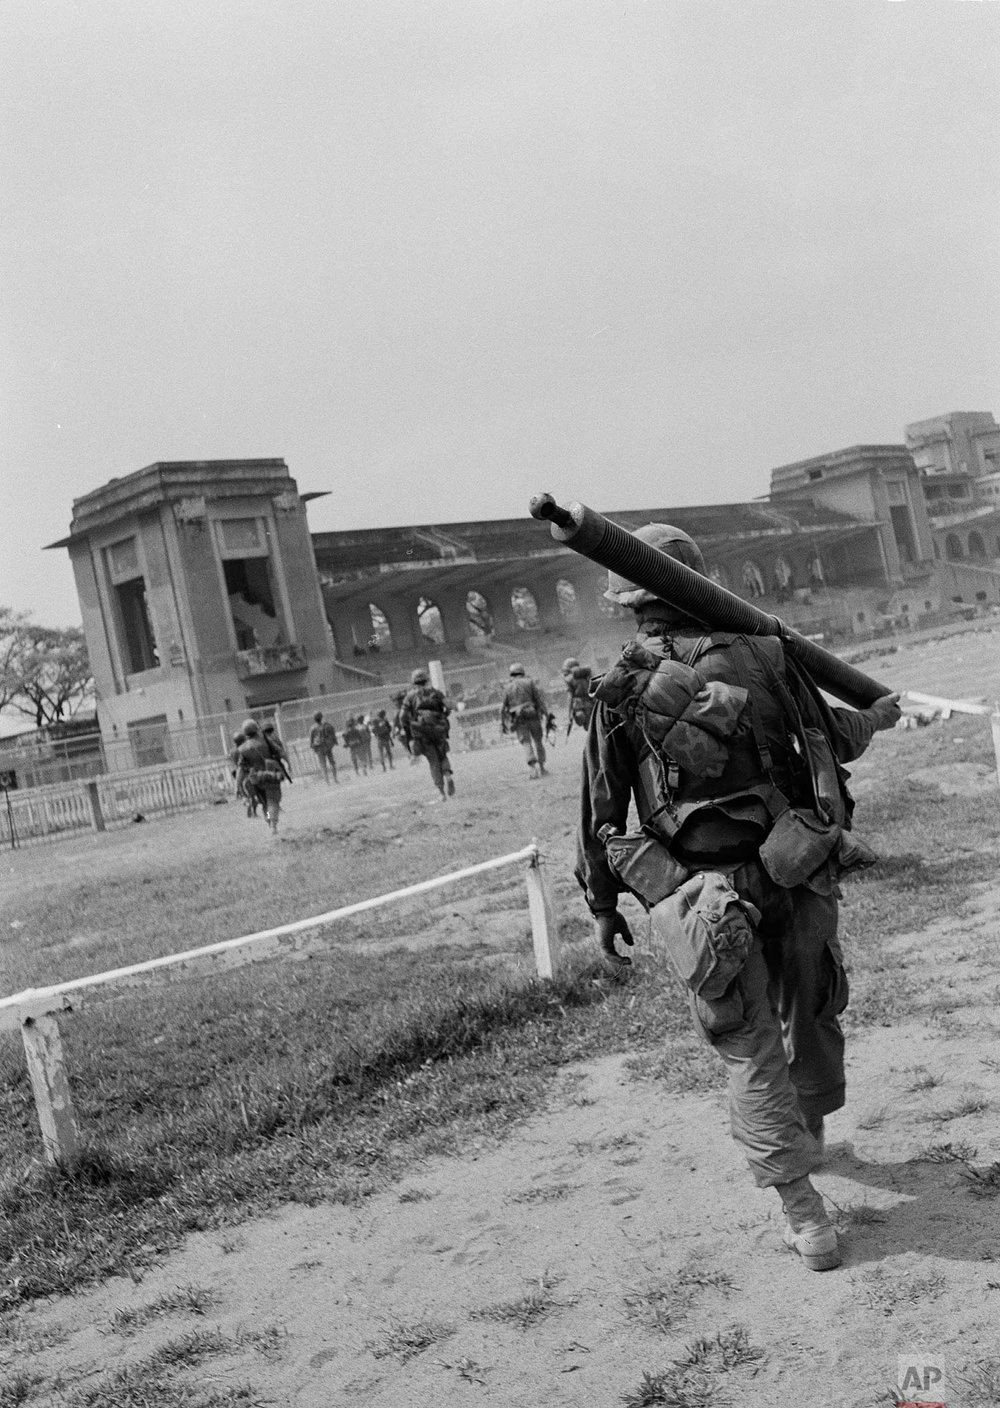  U.S. troops of the 199th Light Infantry Brigade march toward the grandstand after they were lifted to the Phu Tho racetrack in Saigon, South Vietnam, during the Tet Offensive, Feb. 9, 1968. They are there to help South Vietnamese force in routing th